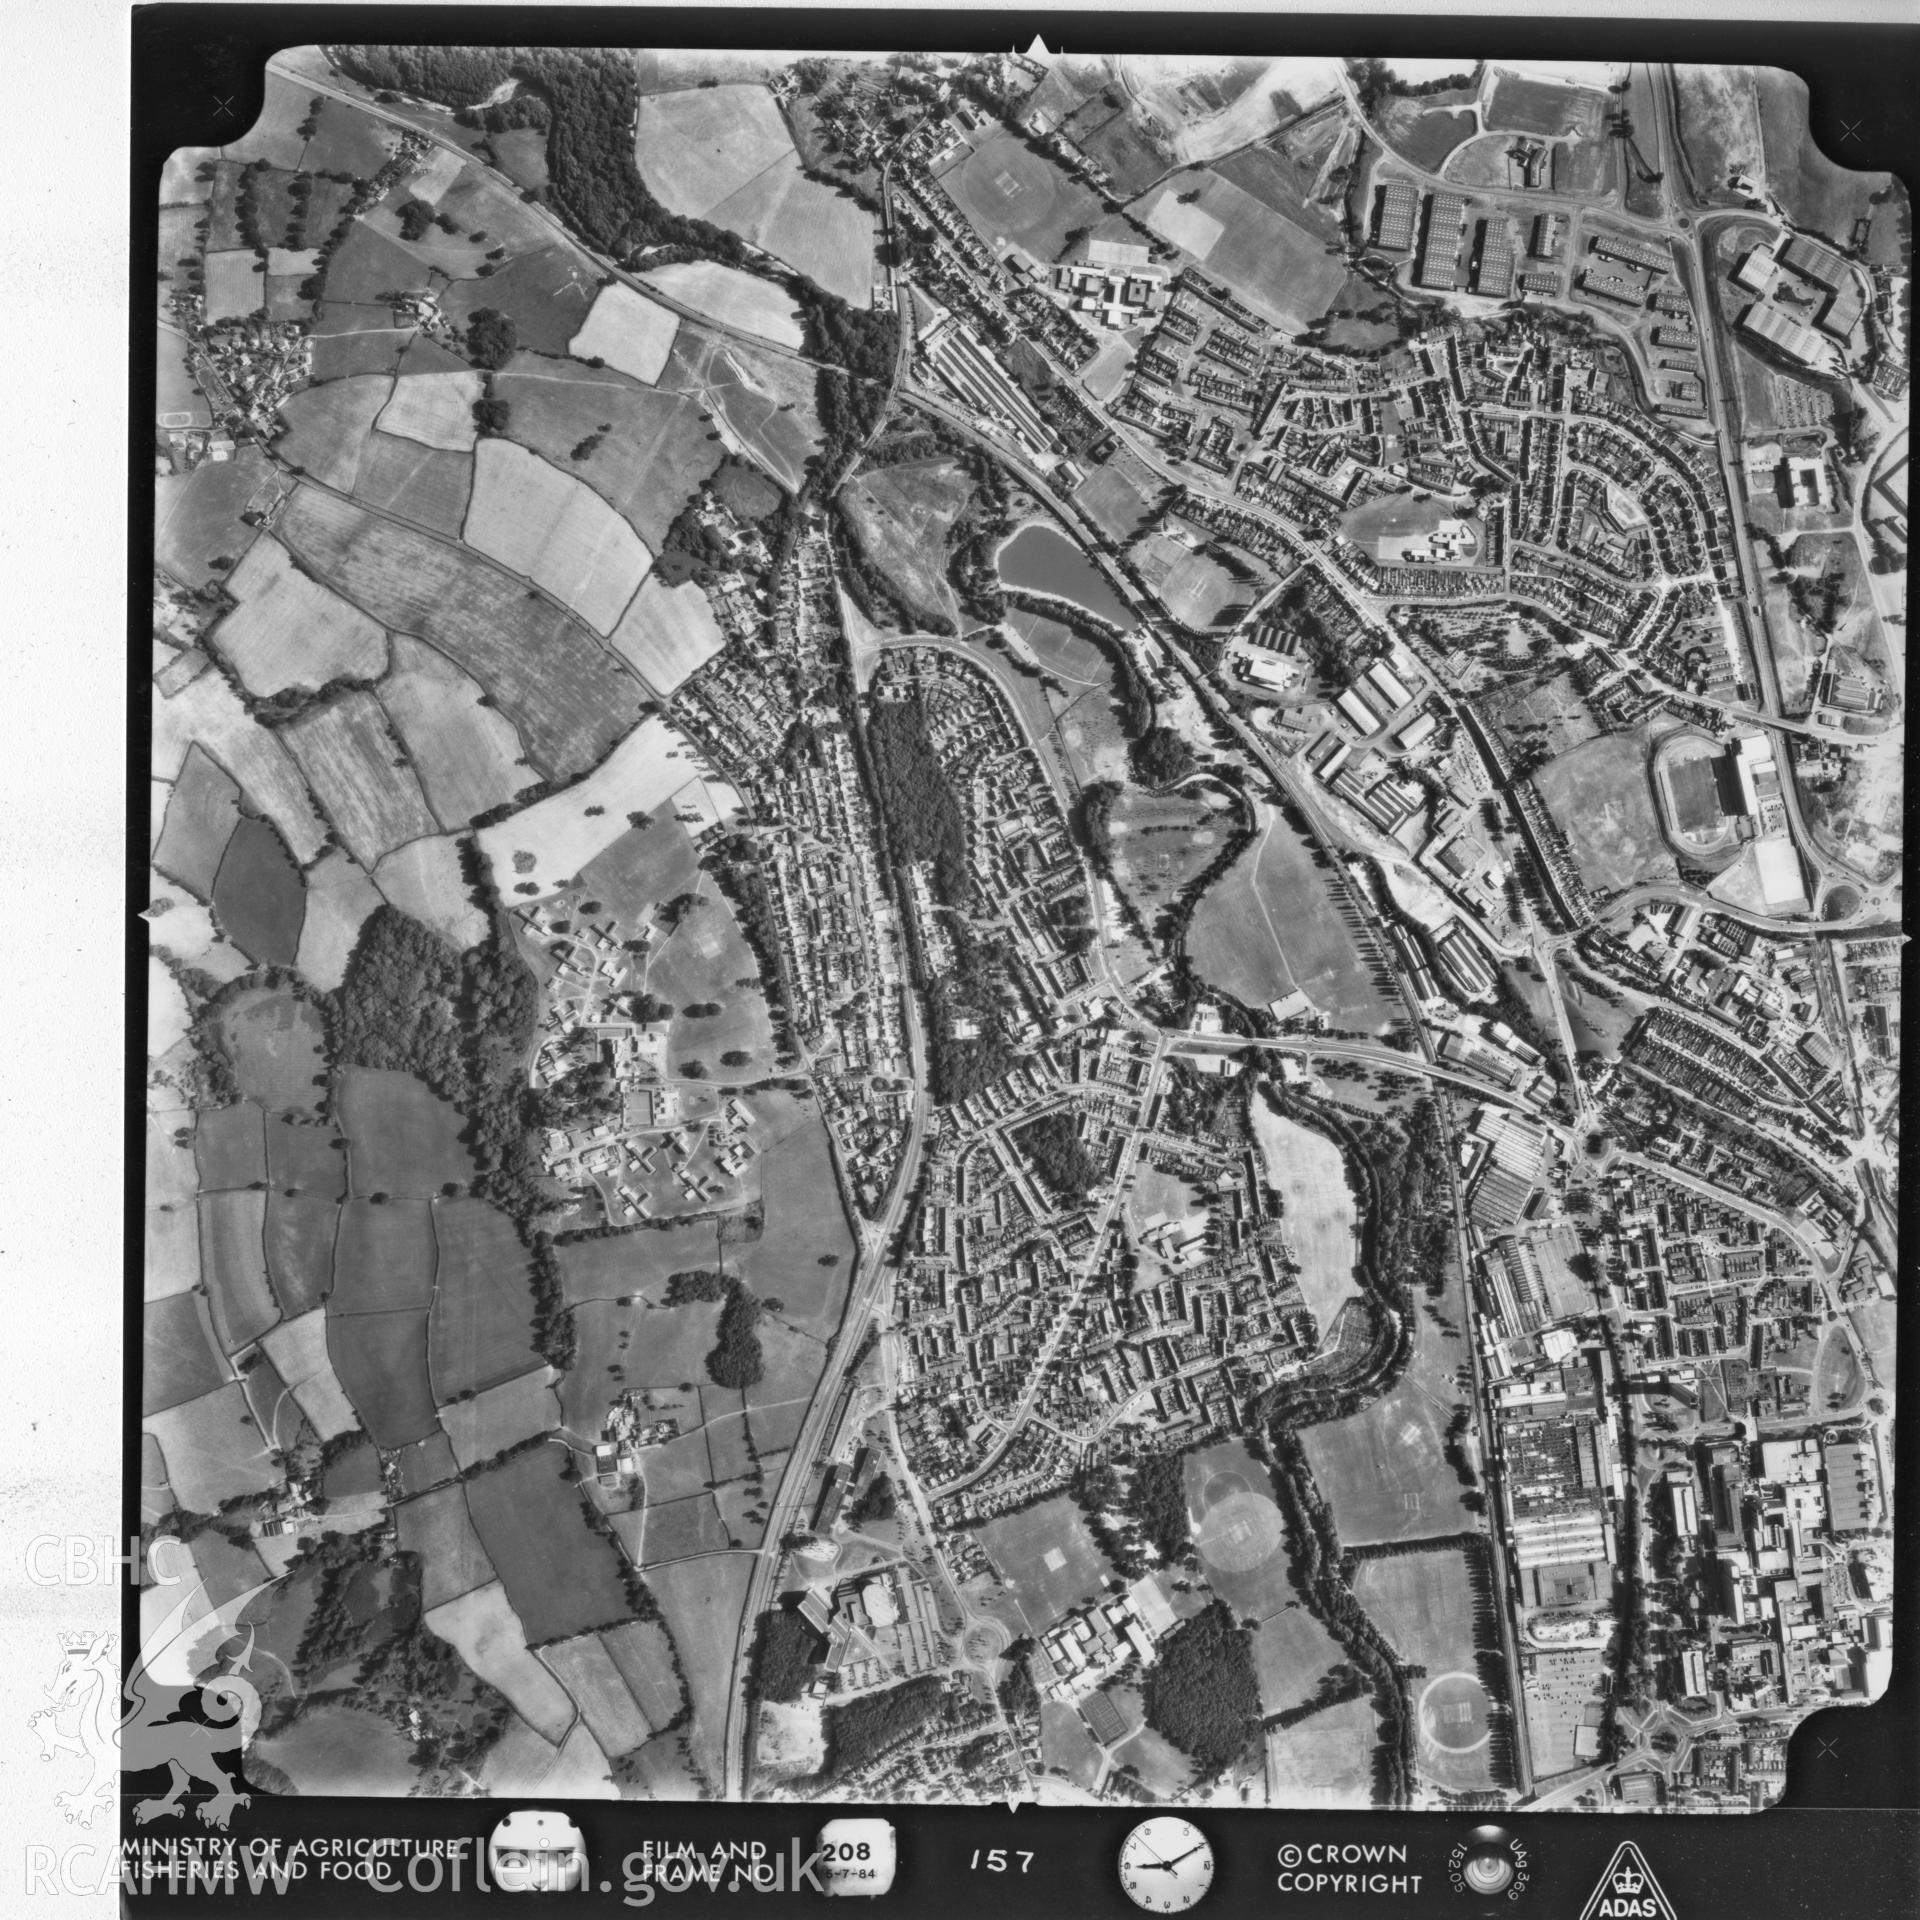 Aerial photograph of Cwmbran, taken in 1984. Included as part of Archaeology Wales' desk based assessment of former Llantarnam Community Primary School, Croeswen, Oakfield, Cwmbran, conducted in 2017.